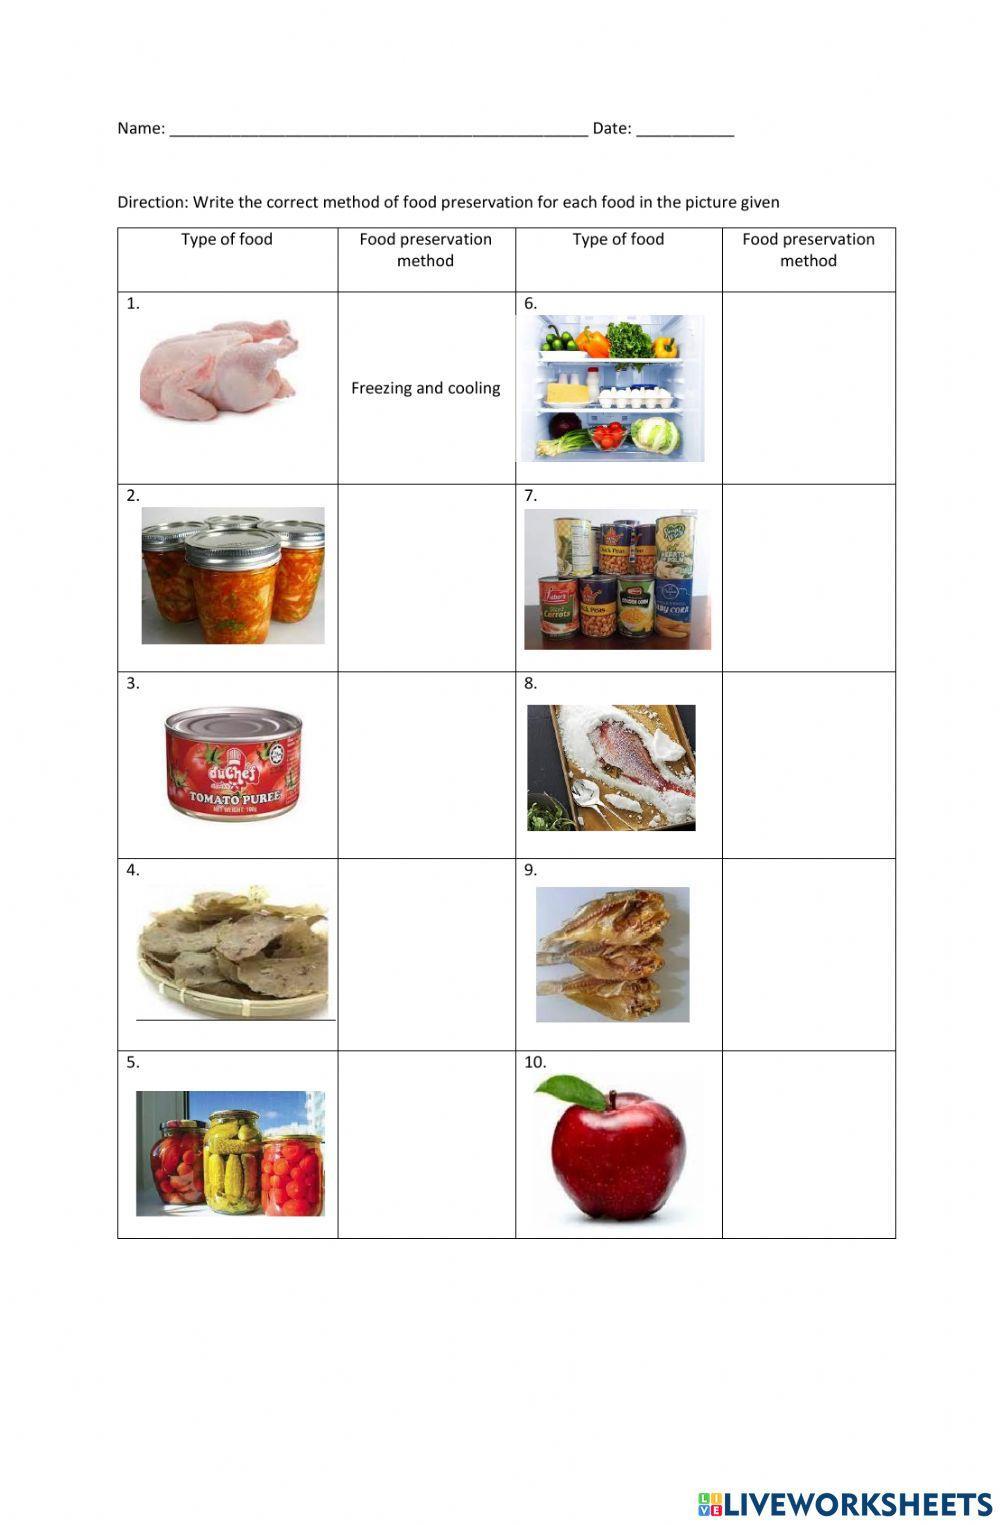 Different ways of food preservation